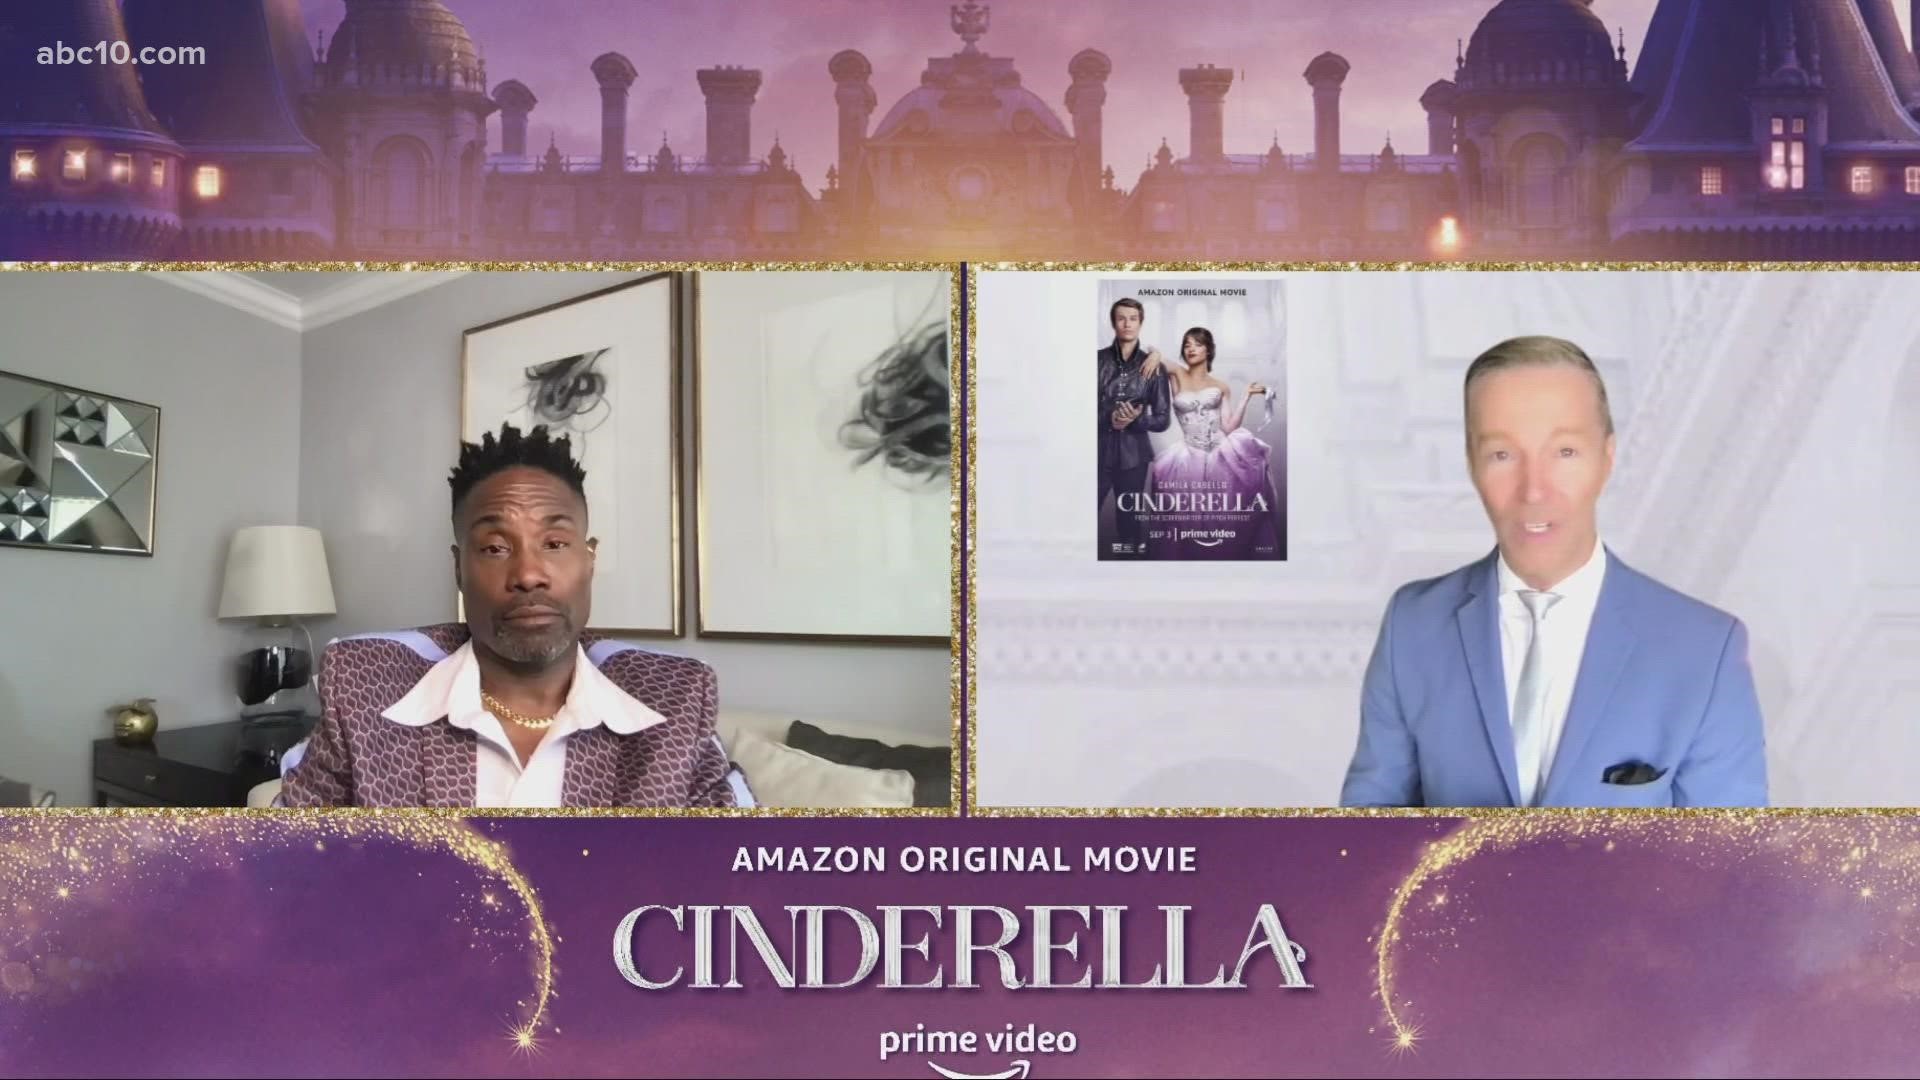 Mark S. Allen chats with Billy Porter about his role in and Amazon's take on the fairy tale classic "Cinderella" and his trailblazing career.